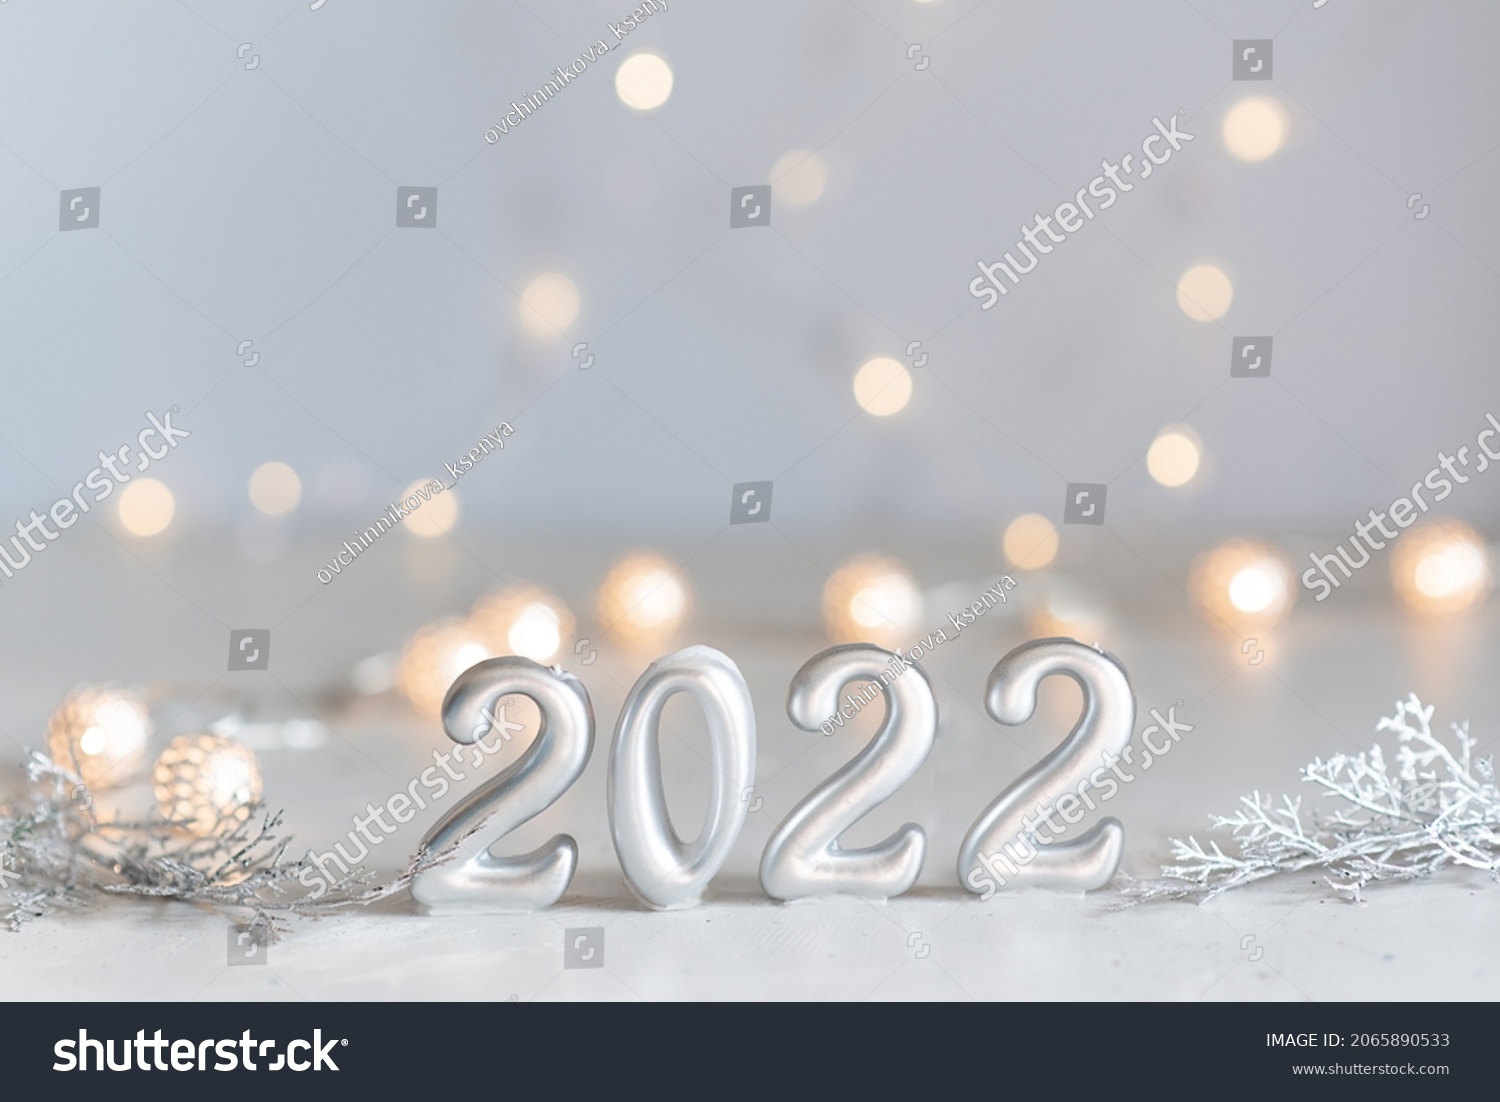 happy new year 2022 background new year holidays card with bright lights,gifts and bottle of hampagne #2065890533